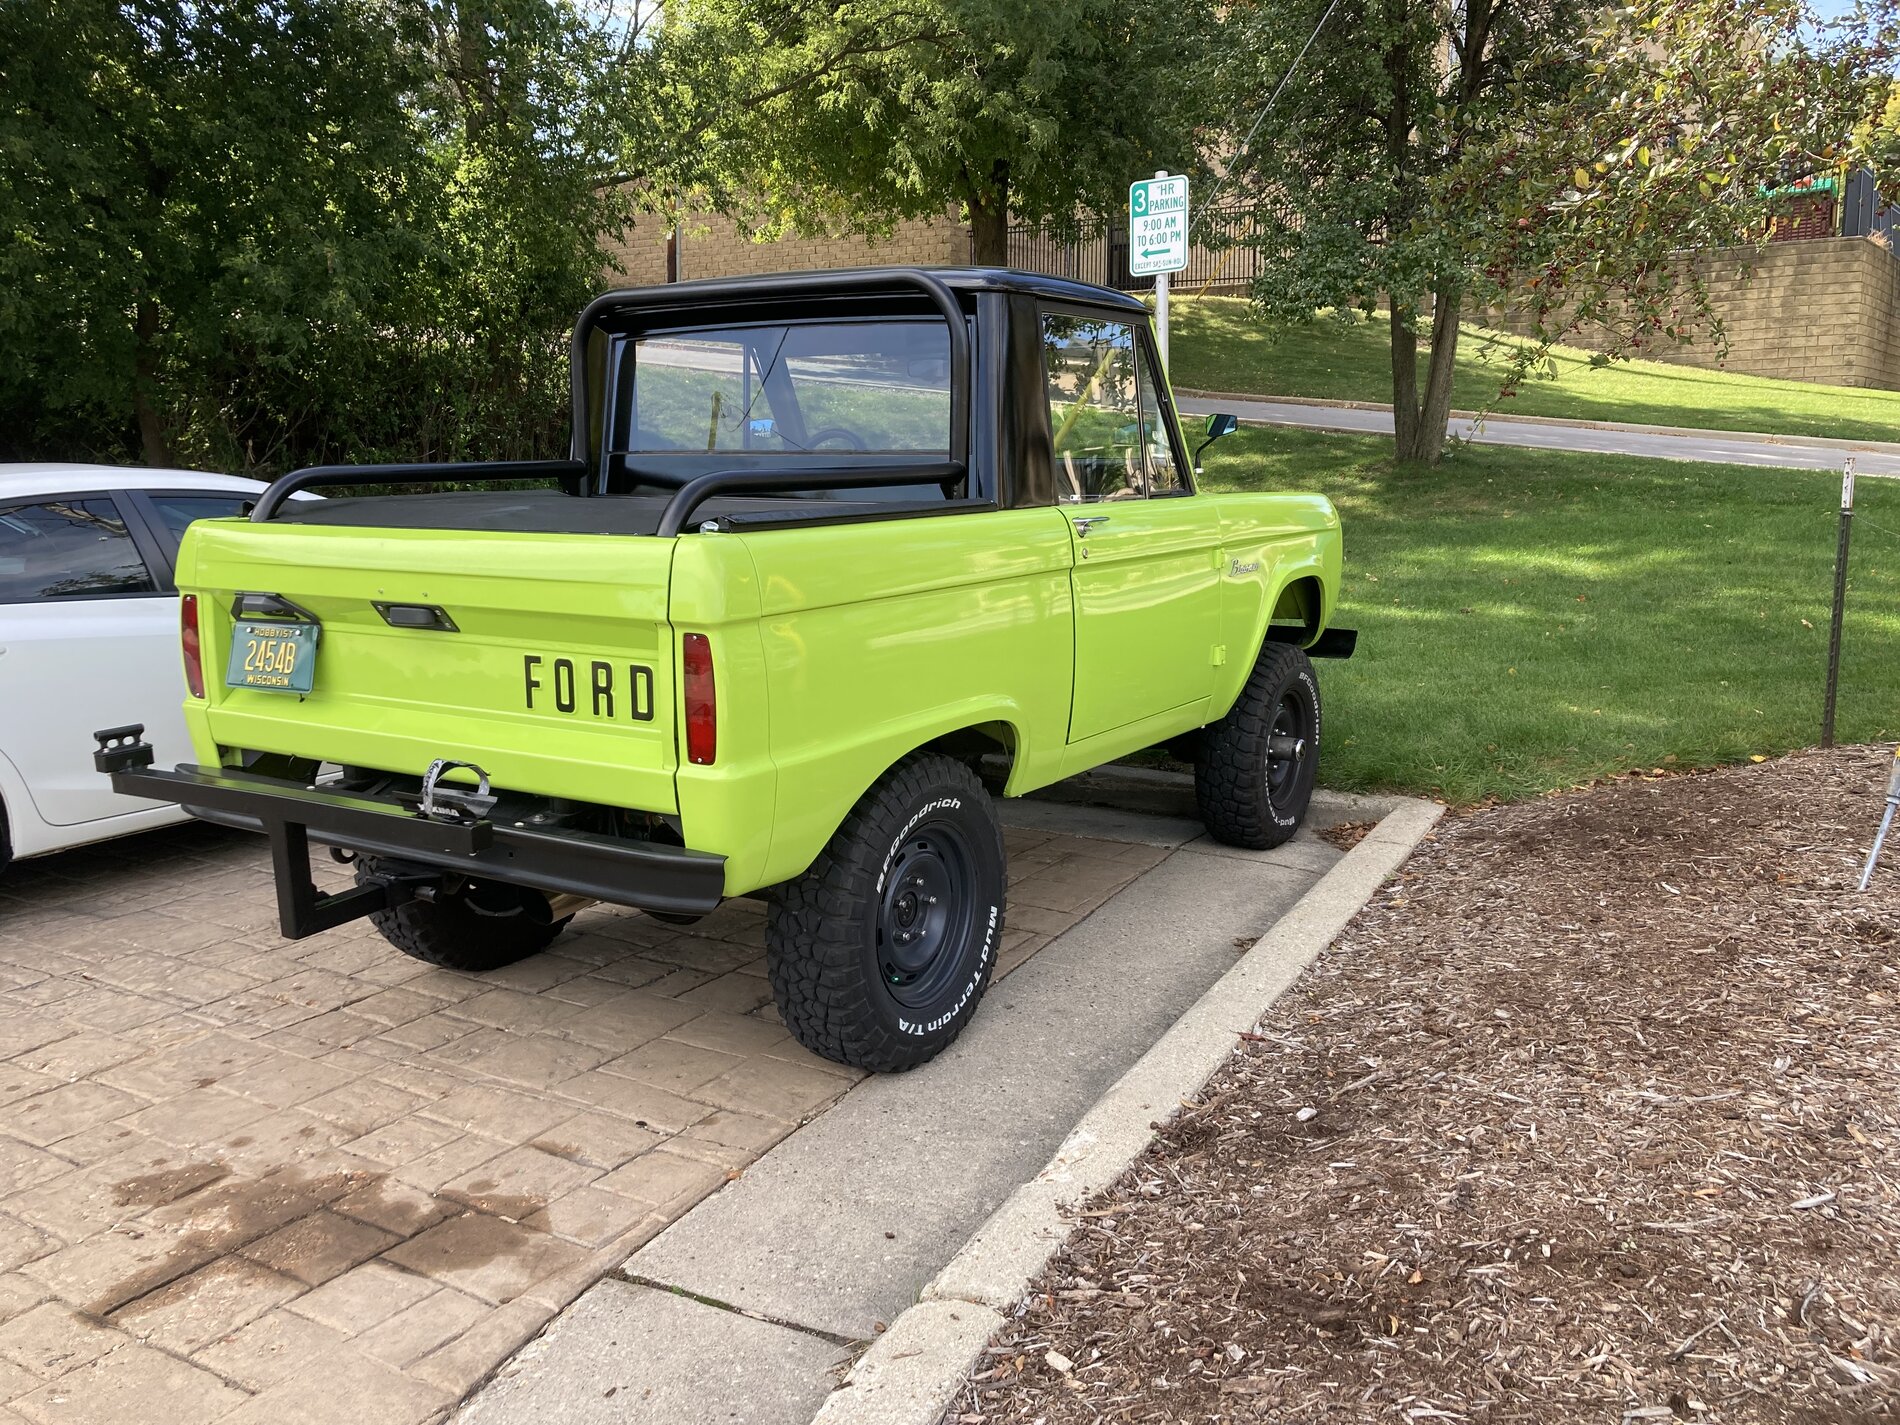 Ford Bronco Spotted in Wauwatosa, WI 143B714F-0A88-4234-A54B-38BA167C6AA2